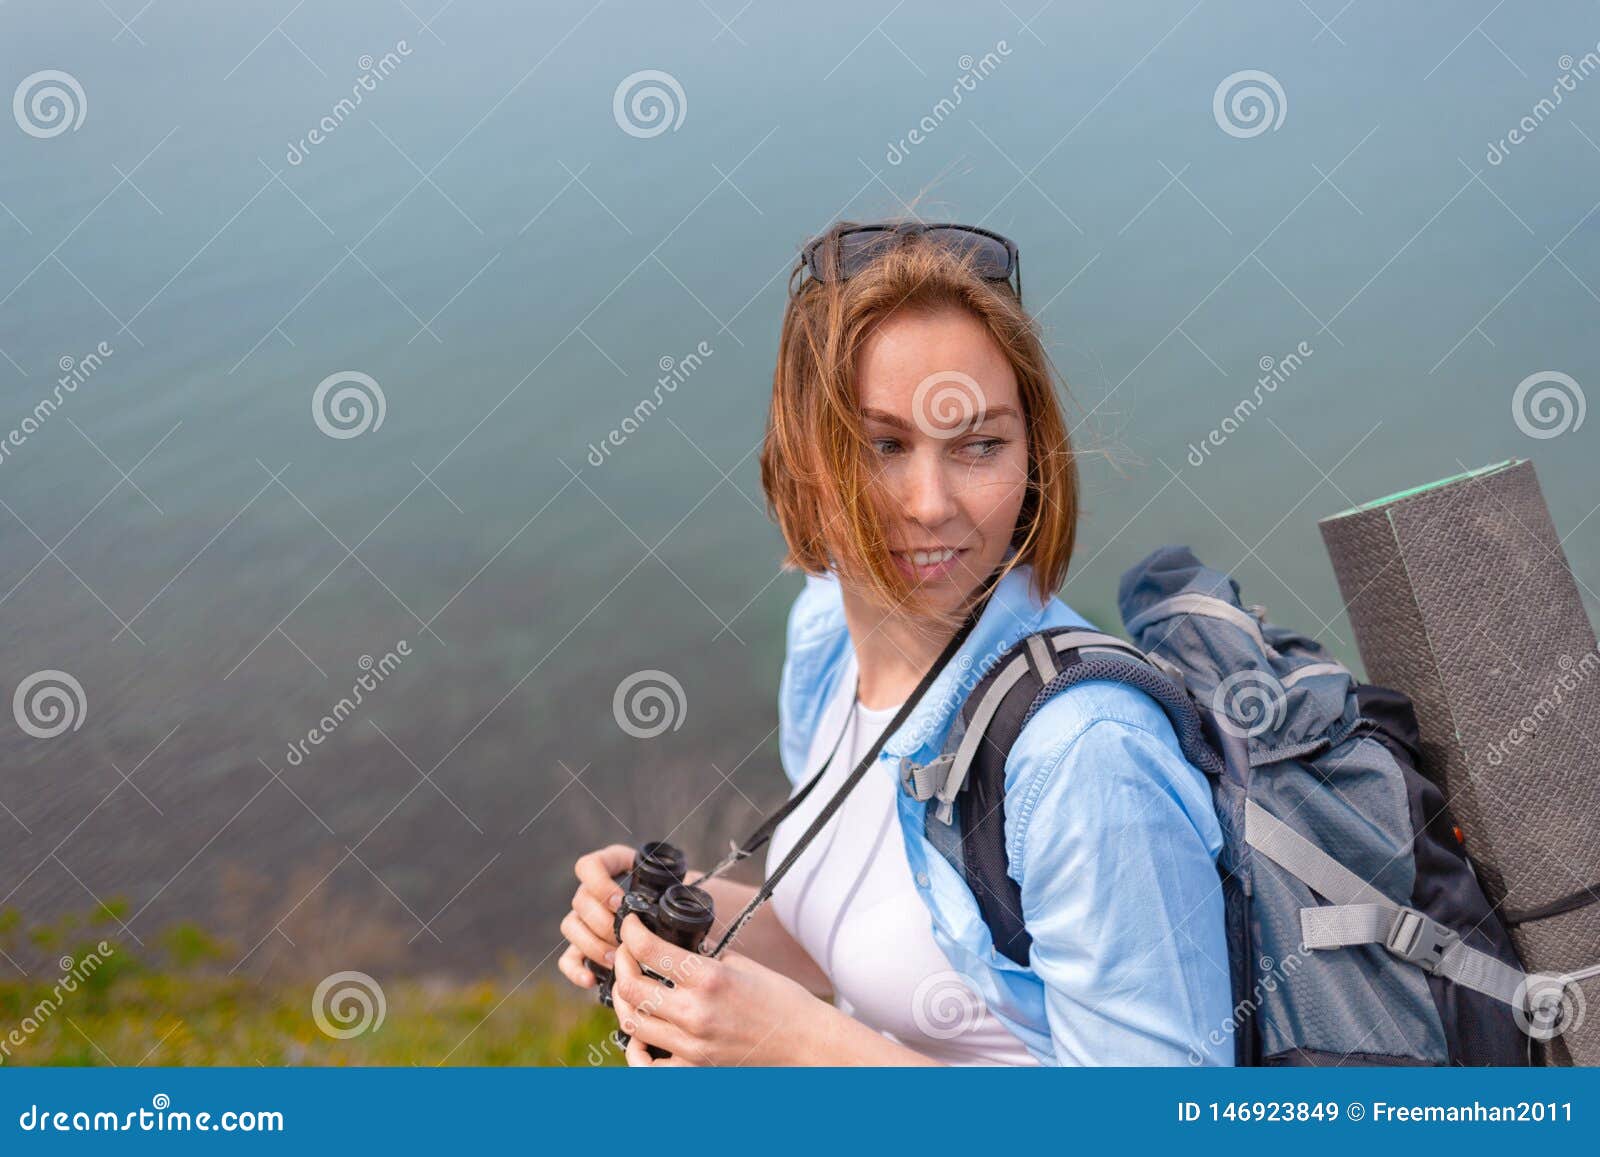 A Young Woman Holding Binoculars and Posing for the Camera. Concept of ...